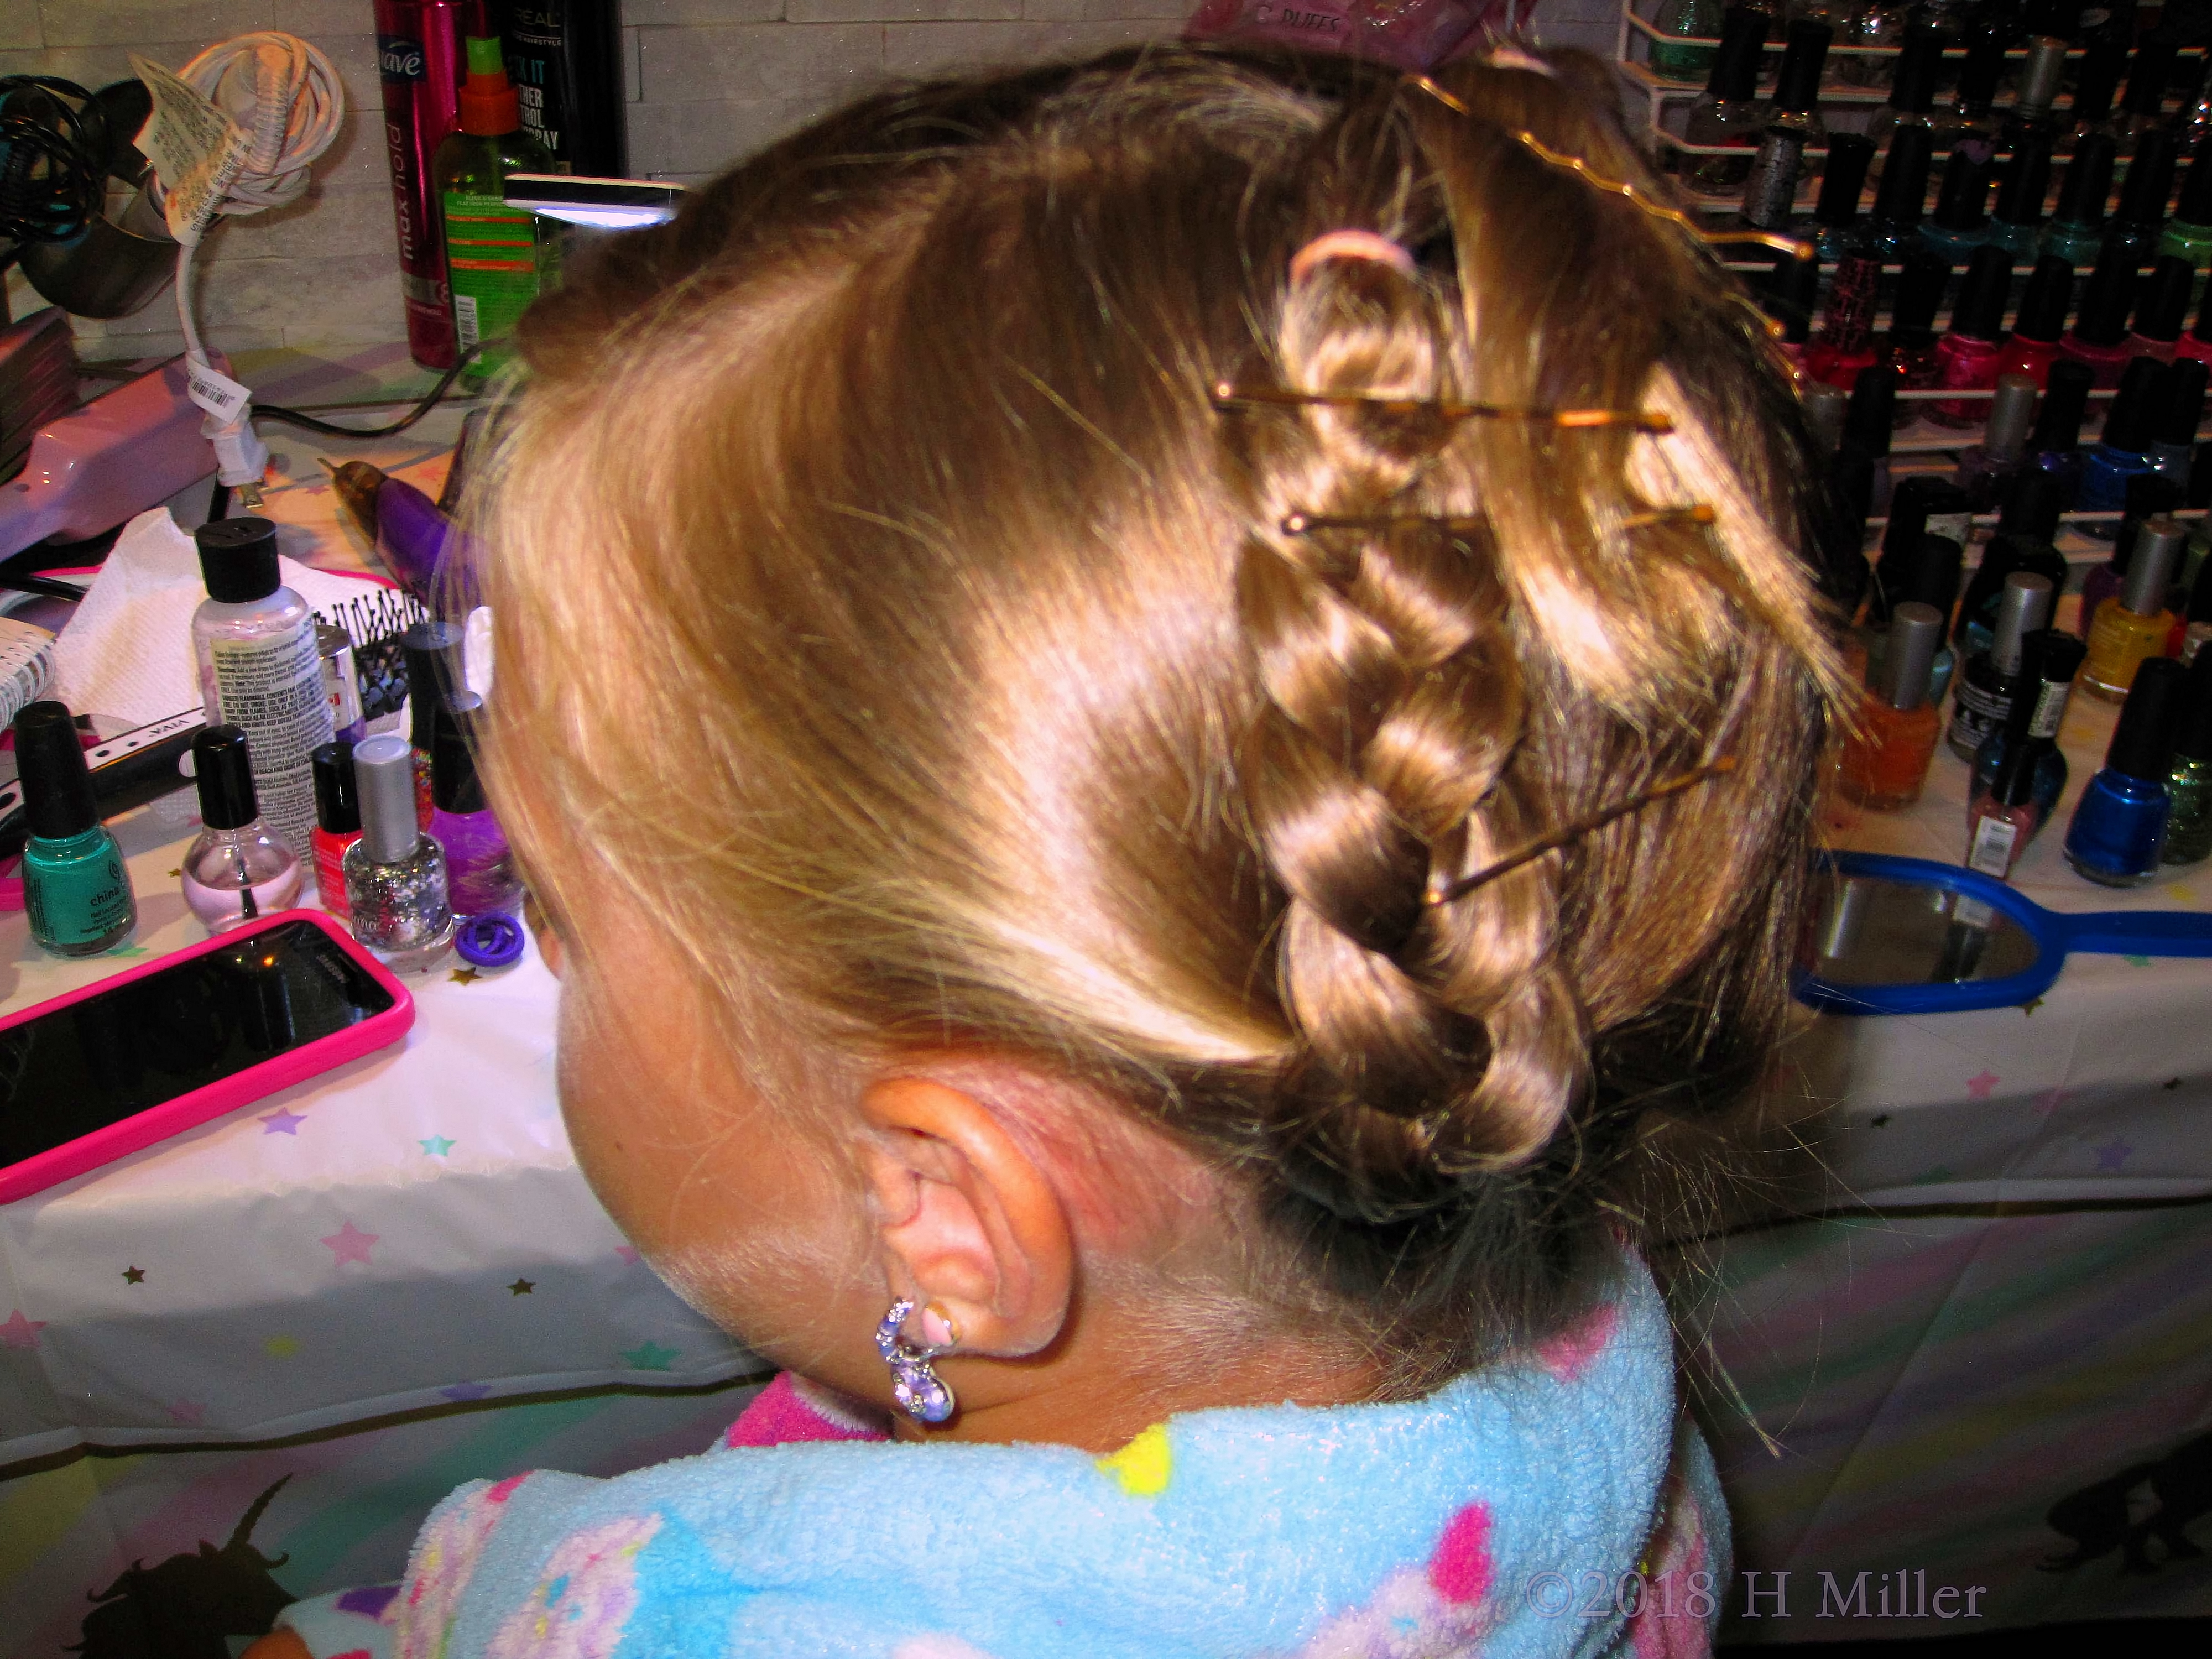 Pinned Up Heidi Braids, Cool Hairstyle For The Birthday Girl!